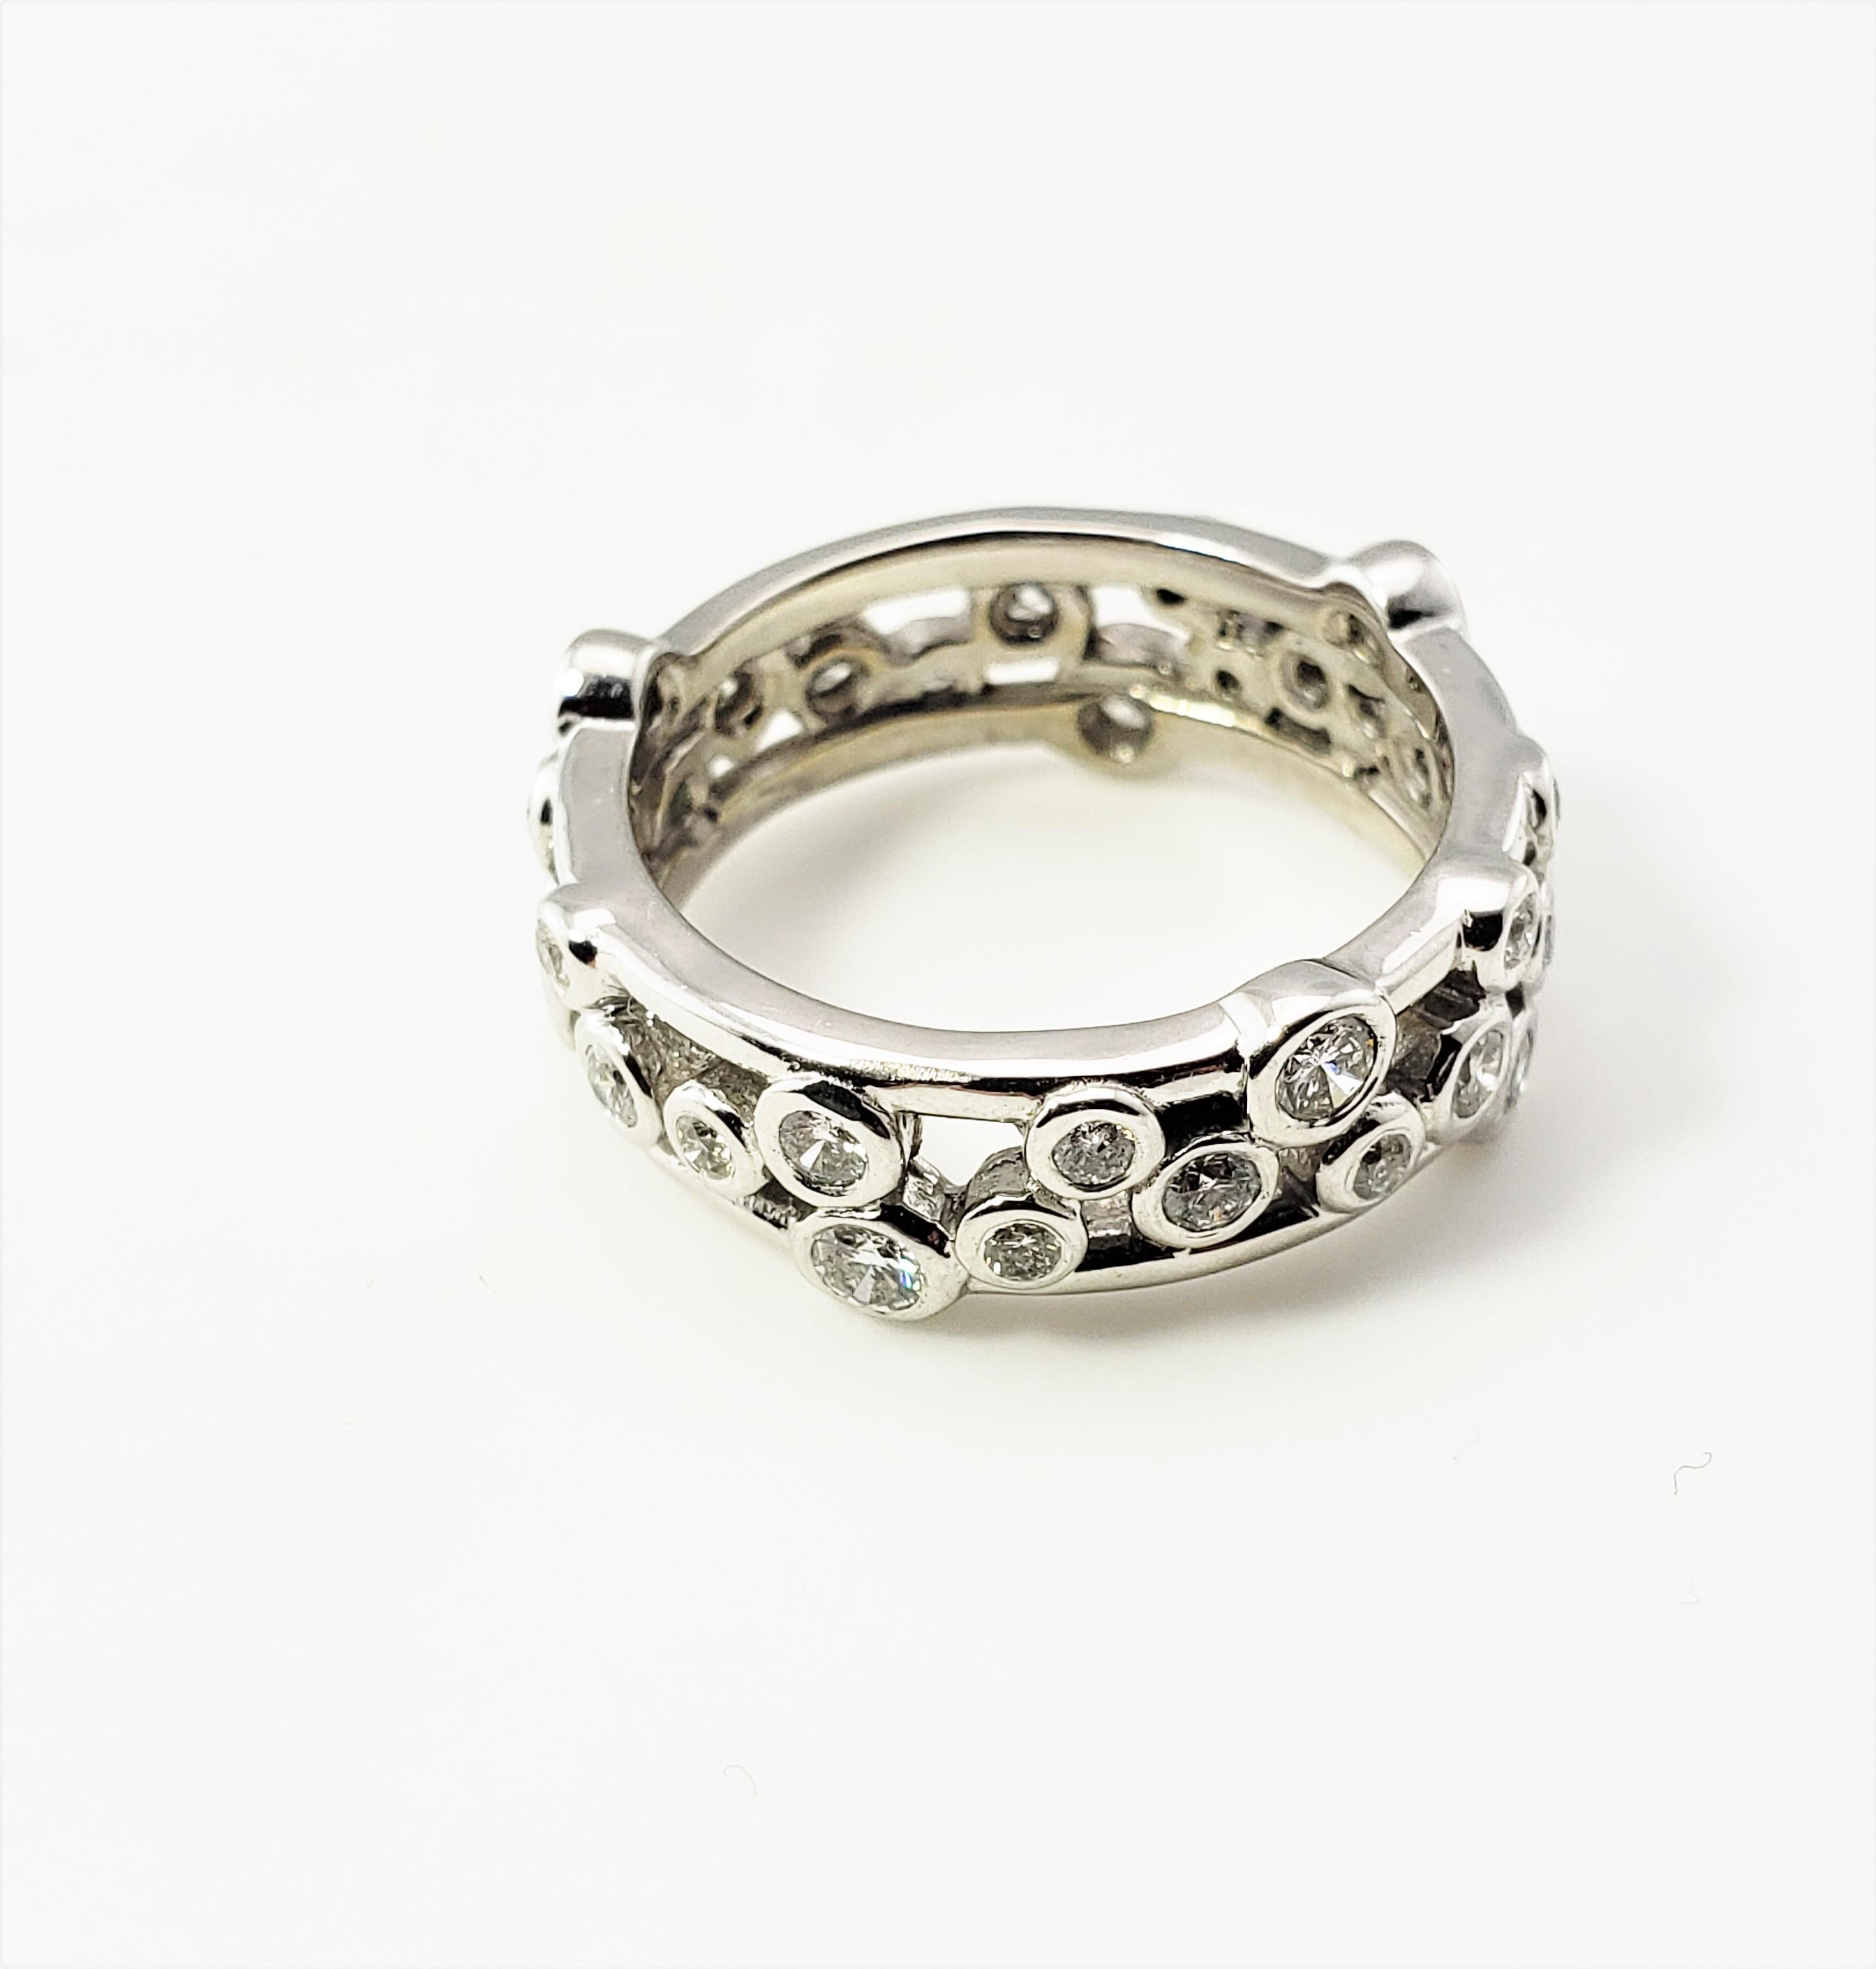 14 Karat White Gold and Diamond Band Ring Size 6-

This lovely band features 32 round brilliant cut bezel set diamonds in beautifully detailed 14K white gold.  Width:  7 mm.

Approximate total diamond weight:  .75 ct.

Diamond color:  I-K

Diamond